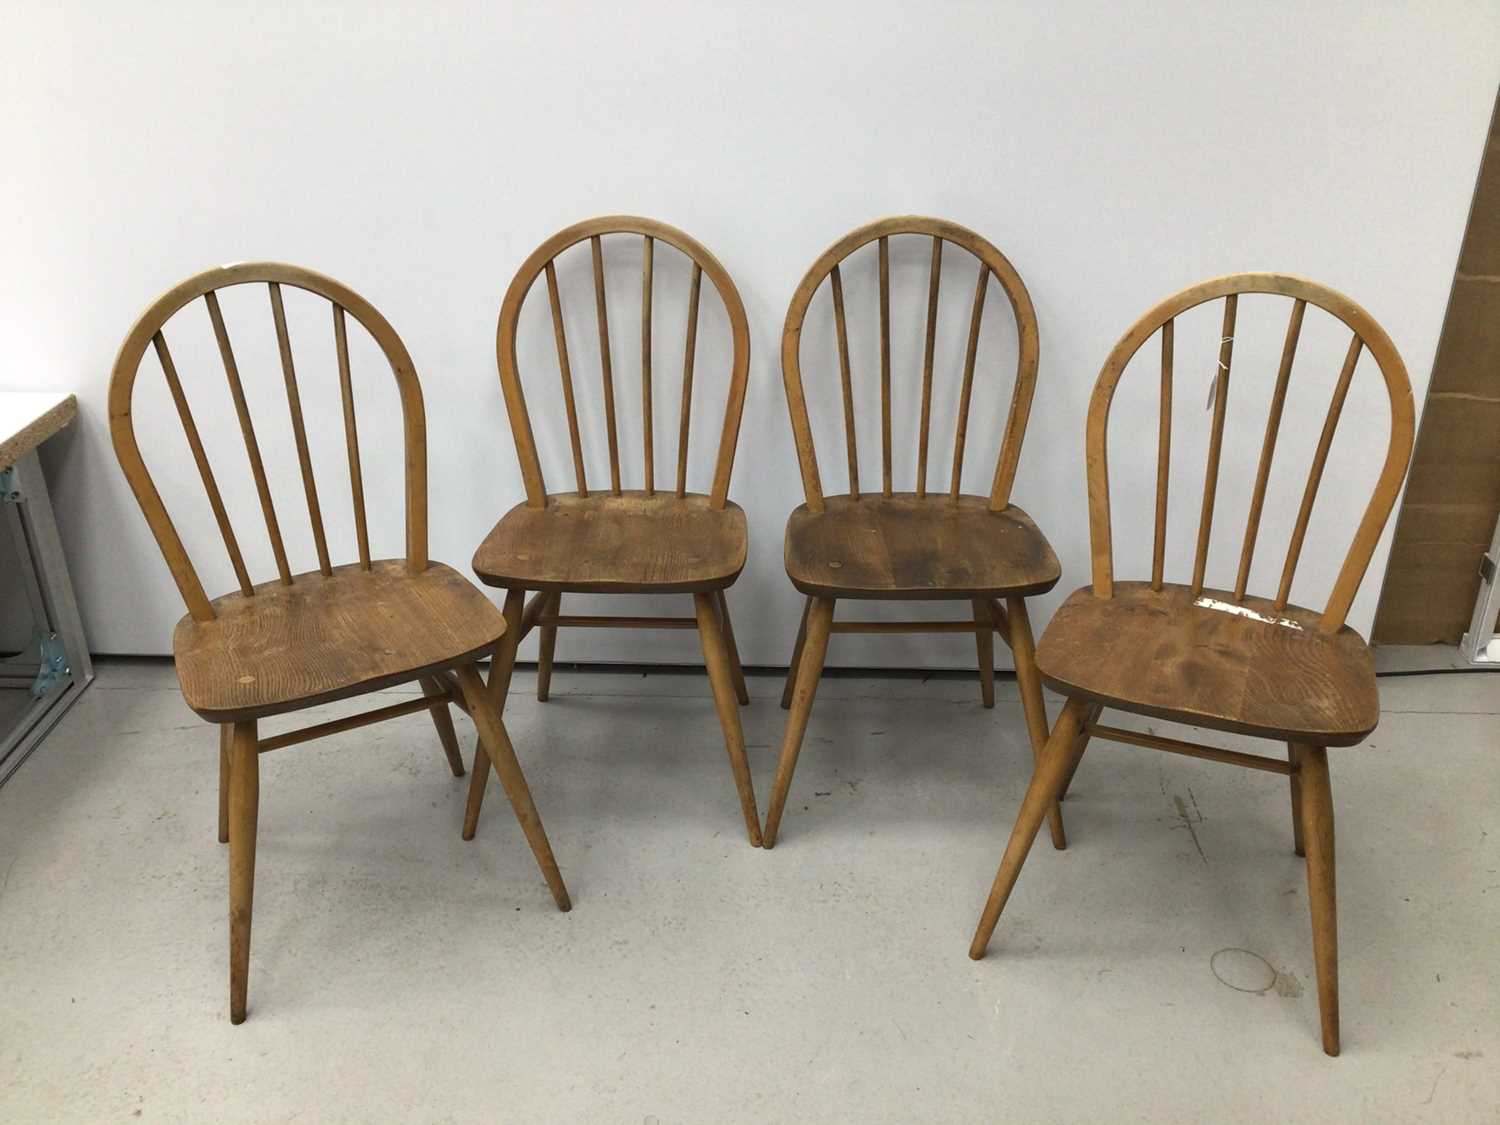 Ercol golden dawn dining table and ensuite set of four chairs - Image 5 of 7